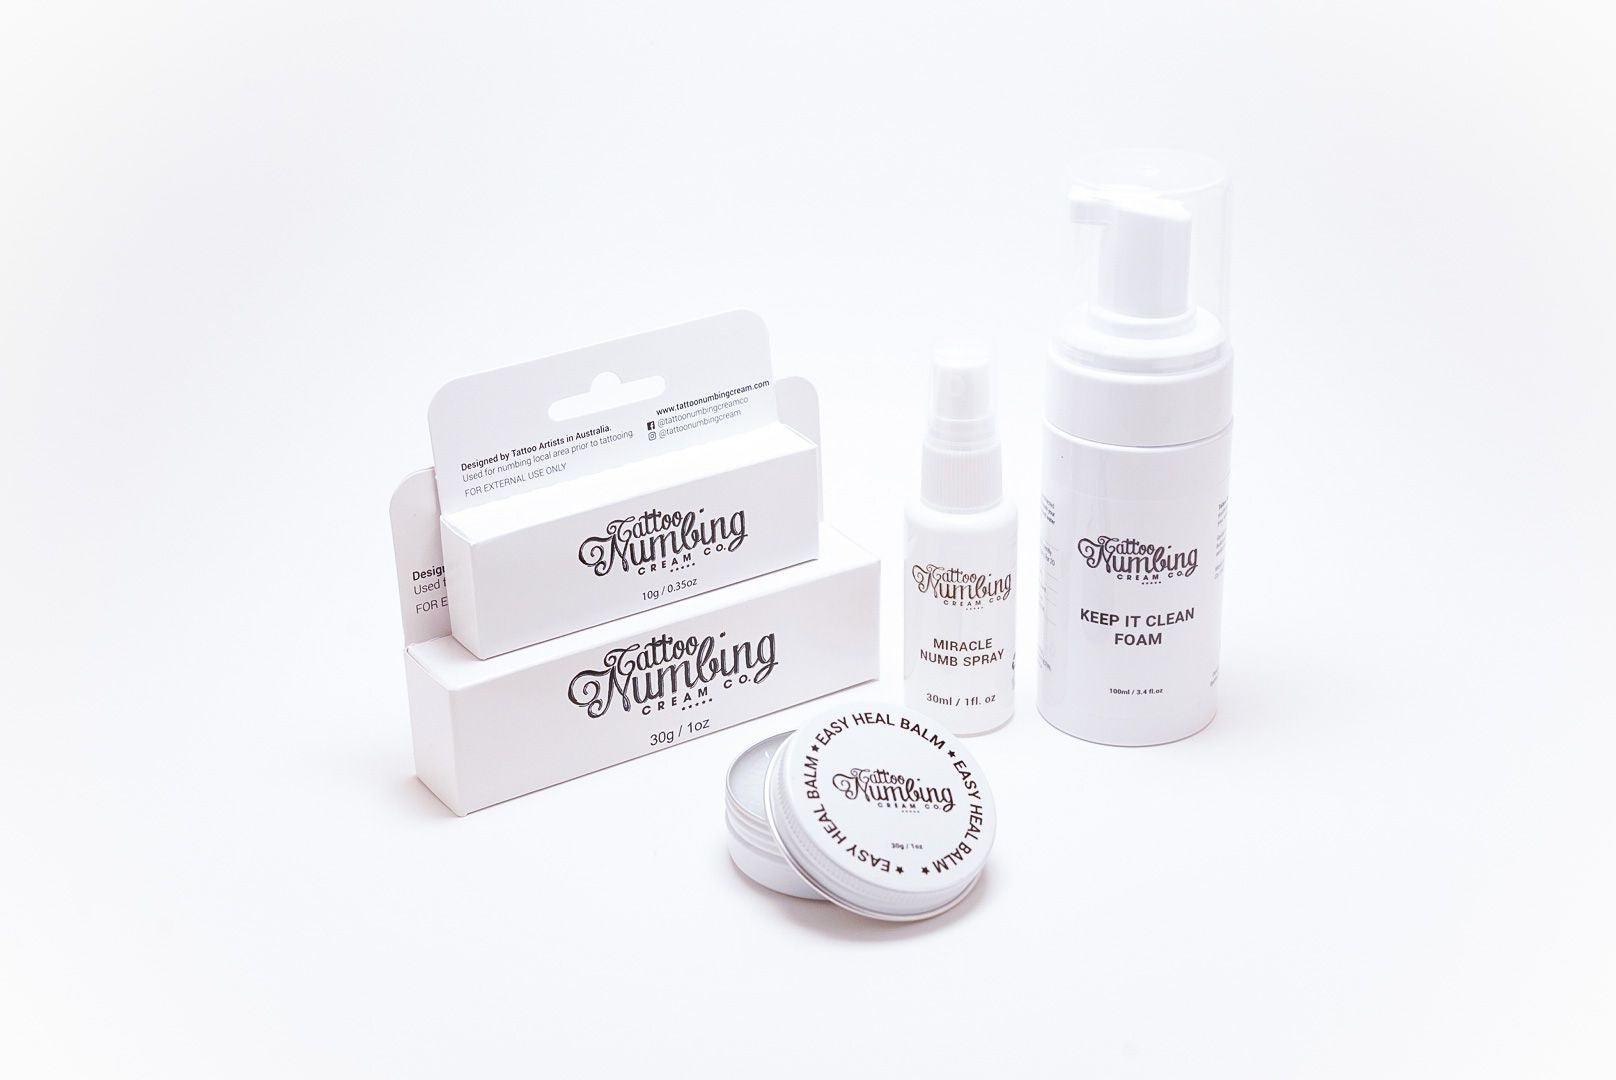 Numbing Cream and Skincare for Tattoos and Tattoo Aftercare  Zensa Skin  Care